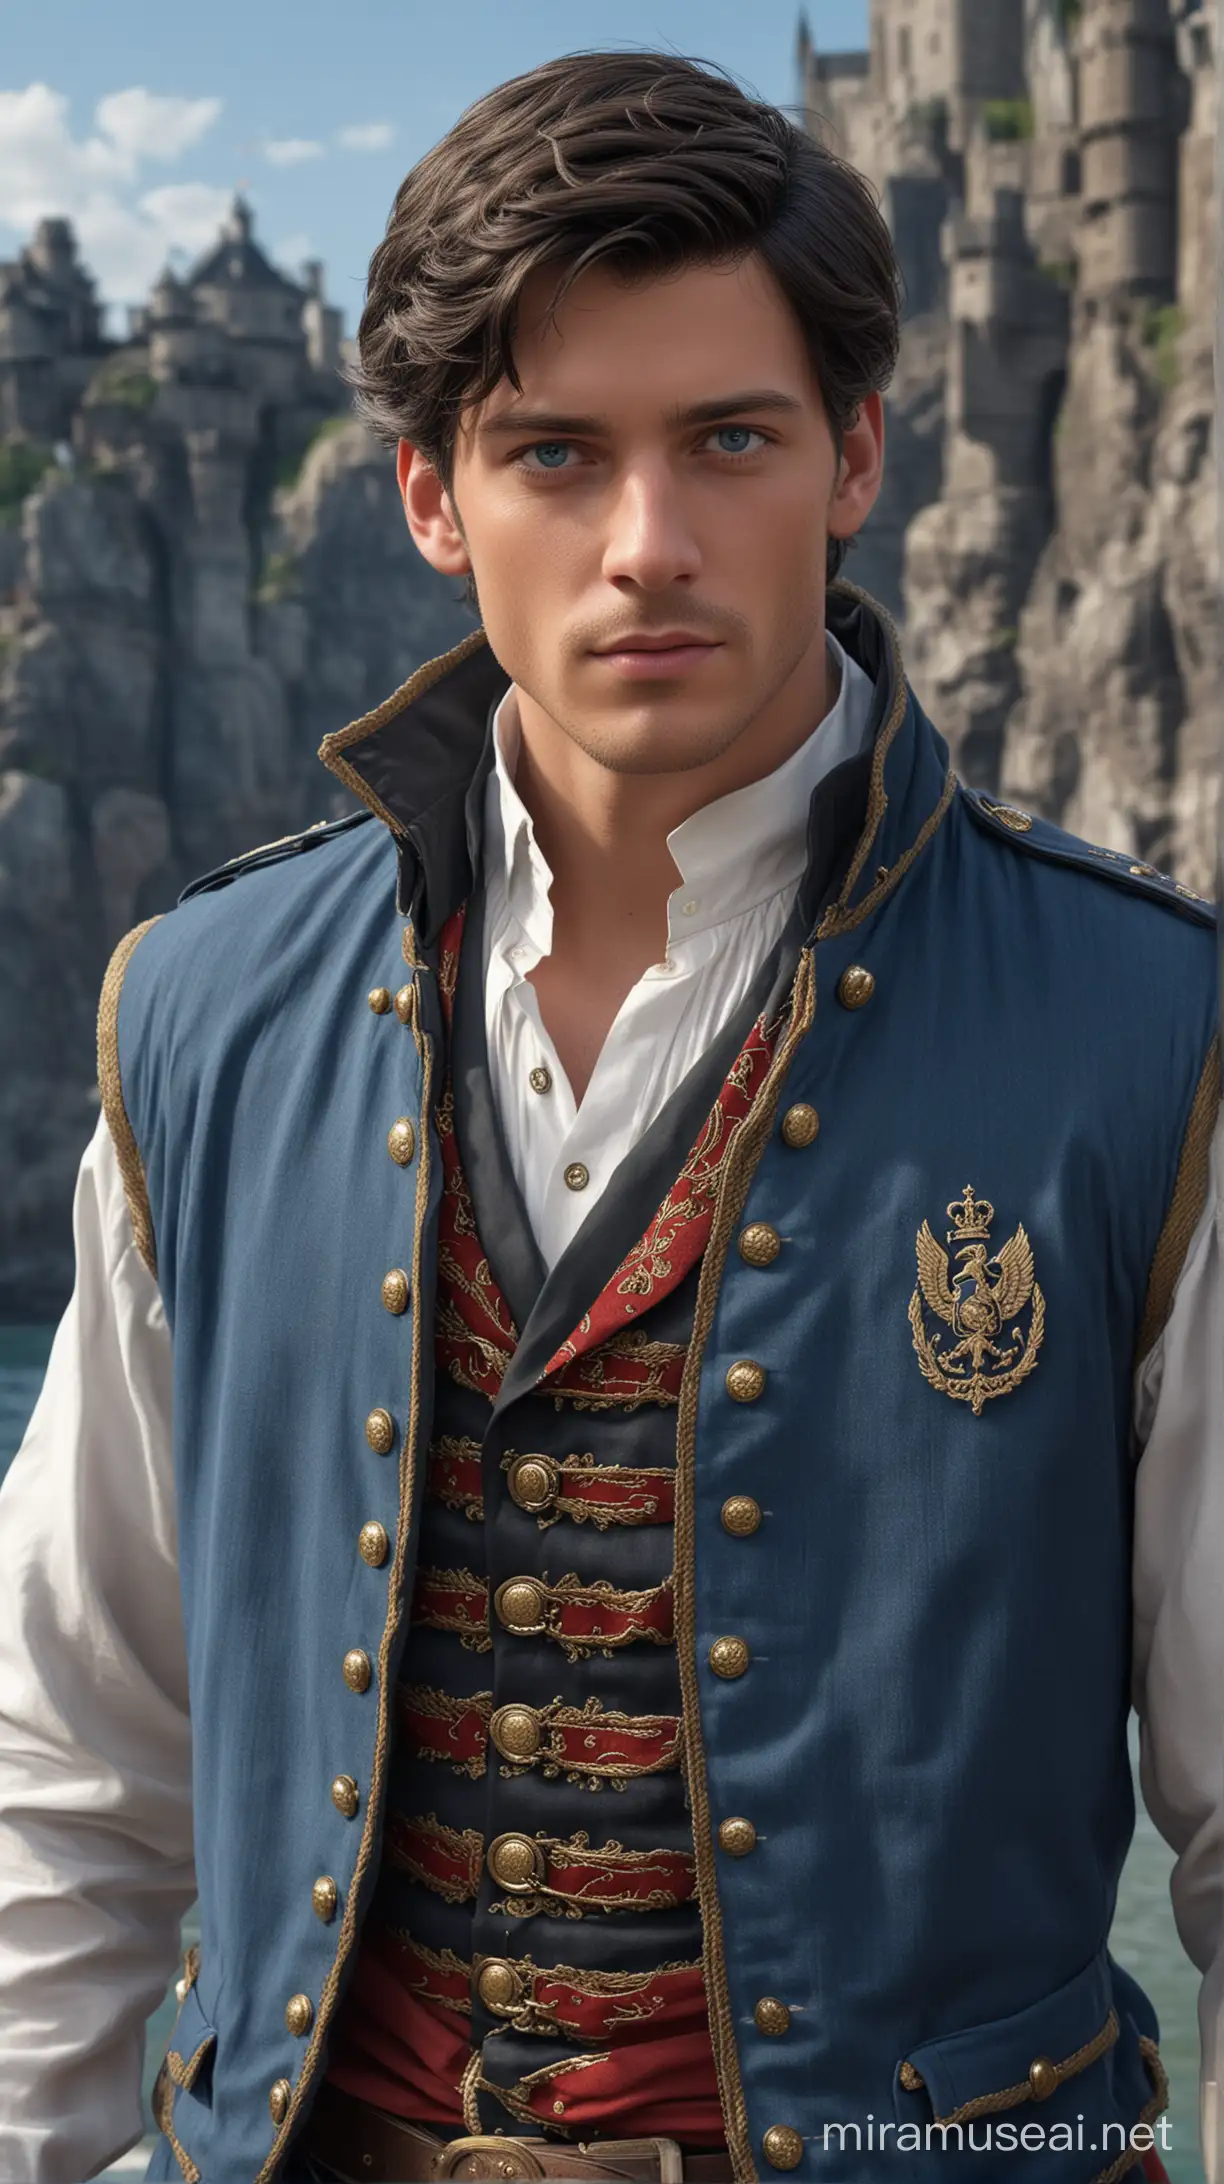 in a sea natural background military there are disney prince Florian is Germany 21-years and
short black hair and blue eyes and Black and White shirt, blue vest closed without buttons and long red cloak on the shoulders and muscled an face beautiful 8k re solution ultra-realistic